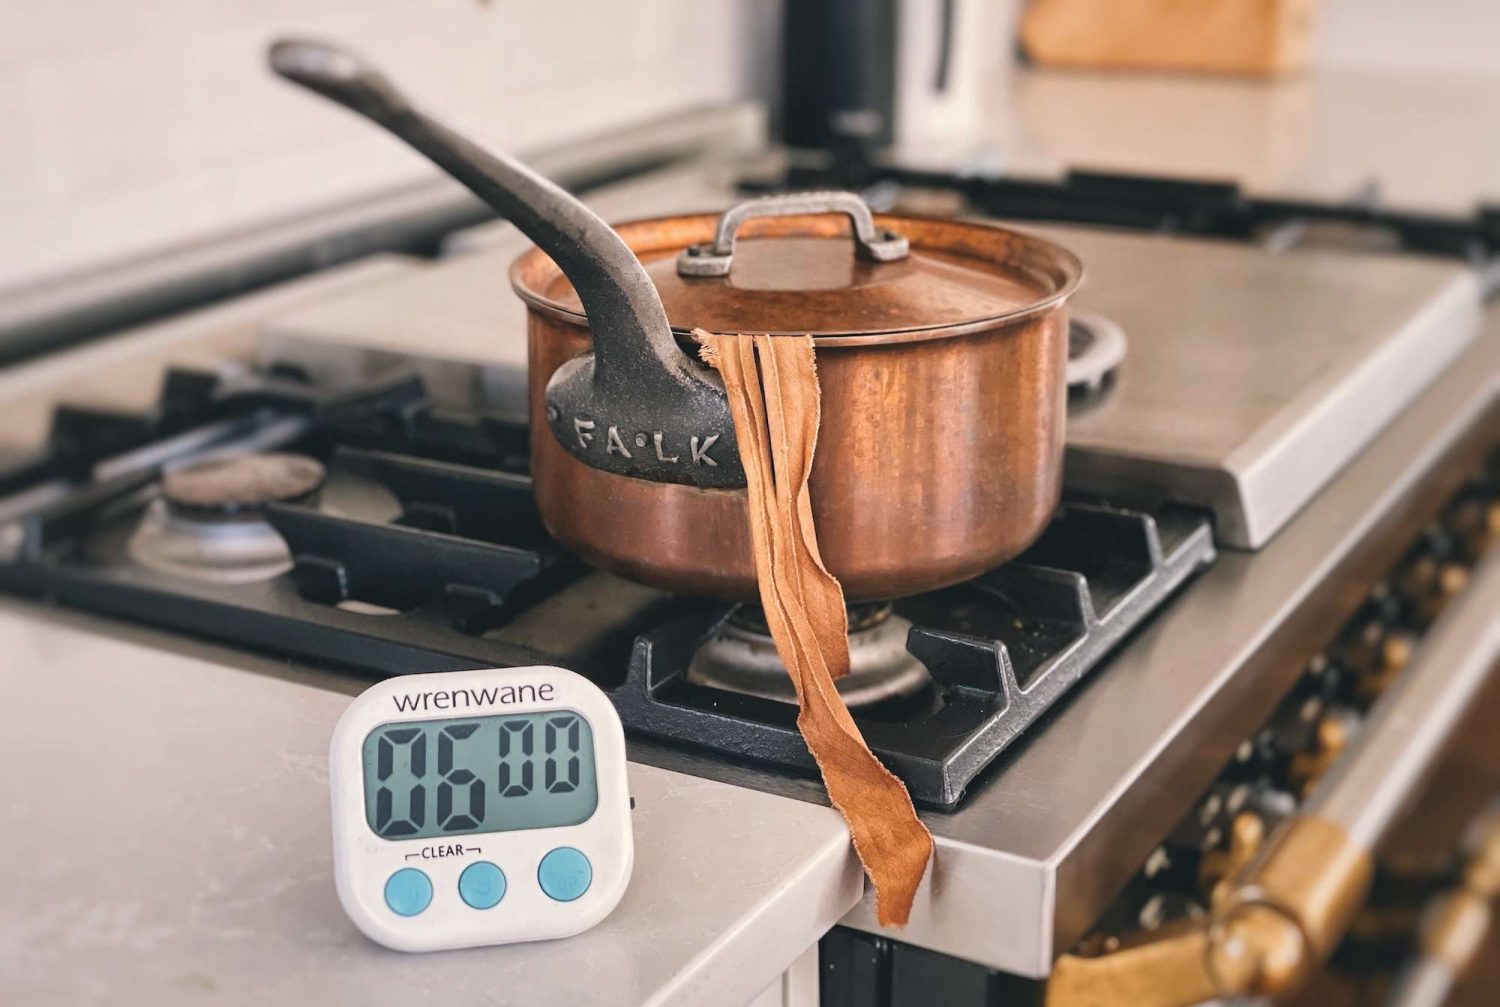 A copper pot brewing kombucha tea. A timer set to 6 minutes sitting in front of it.